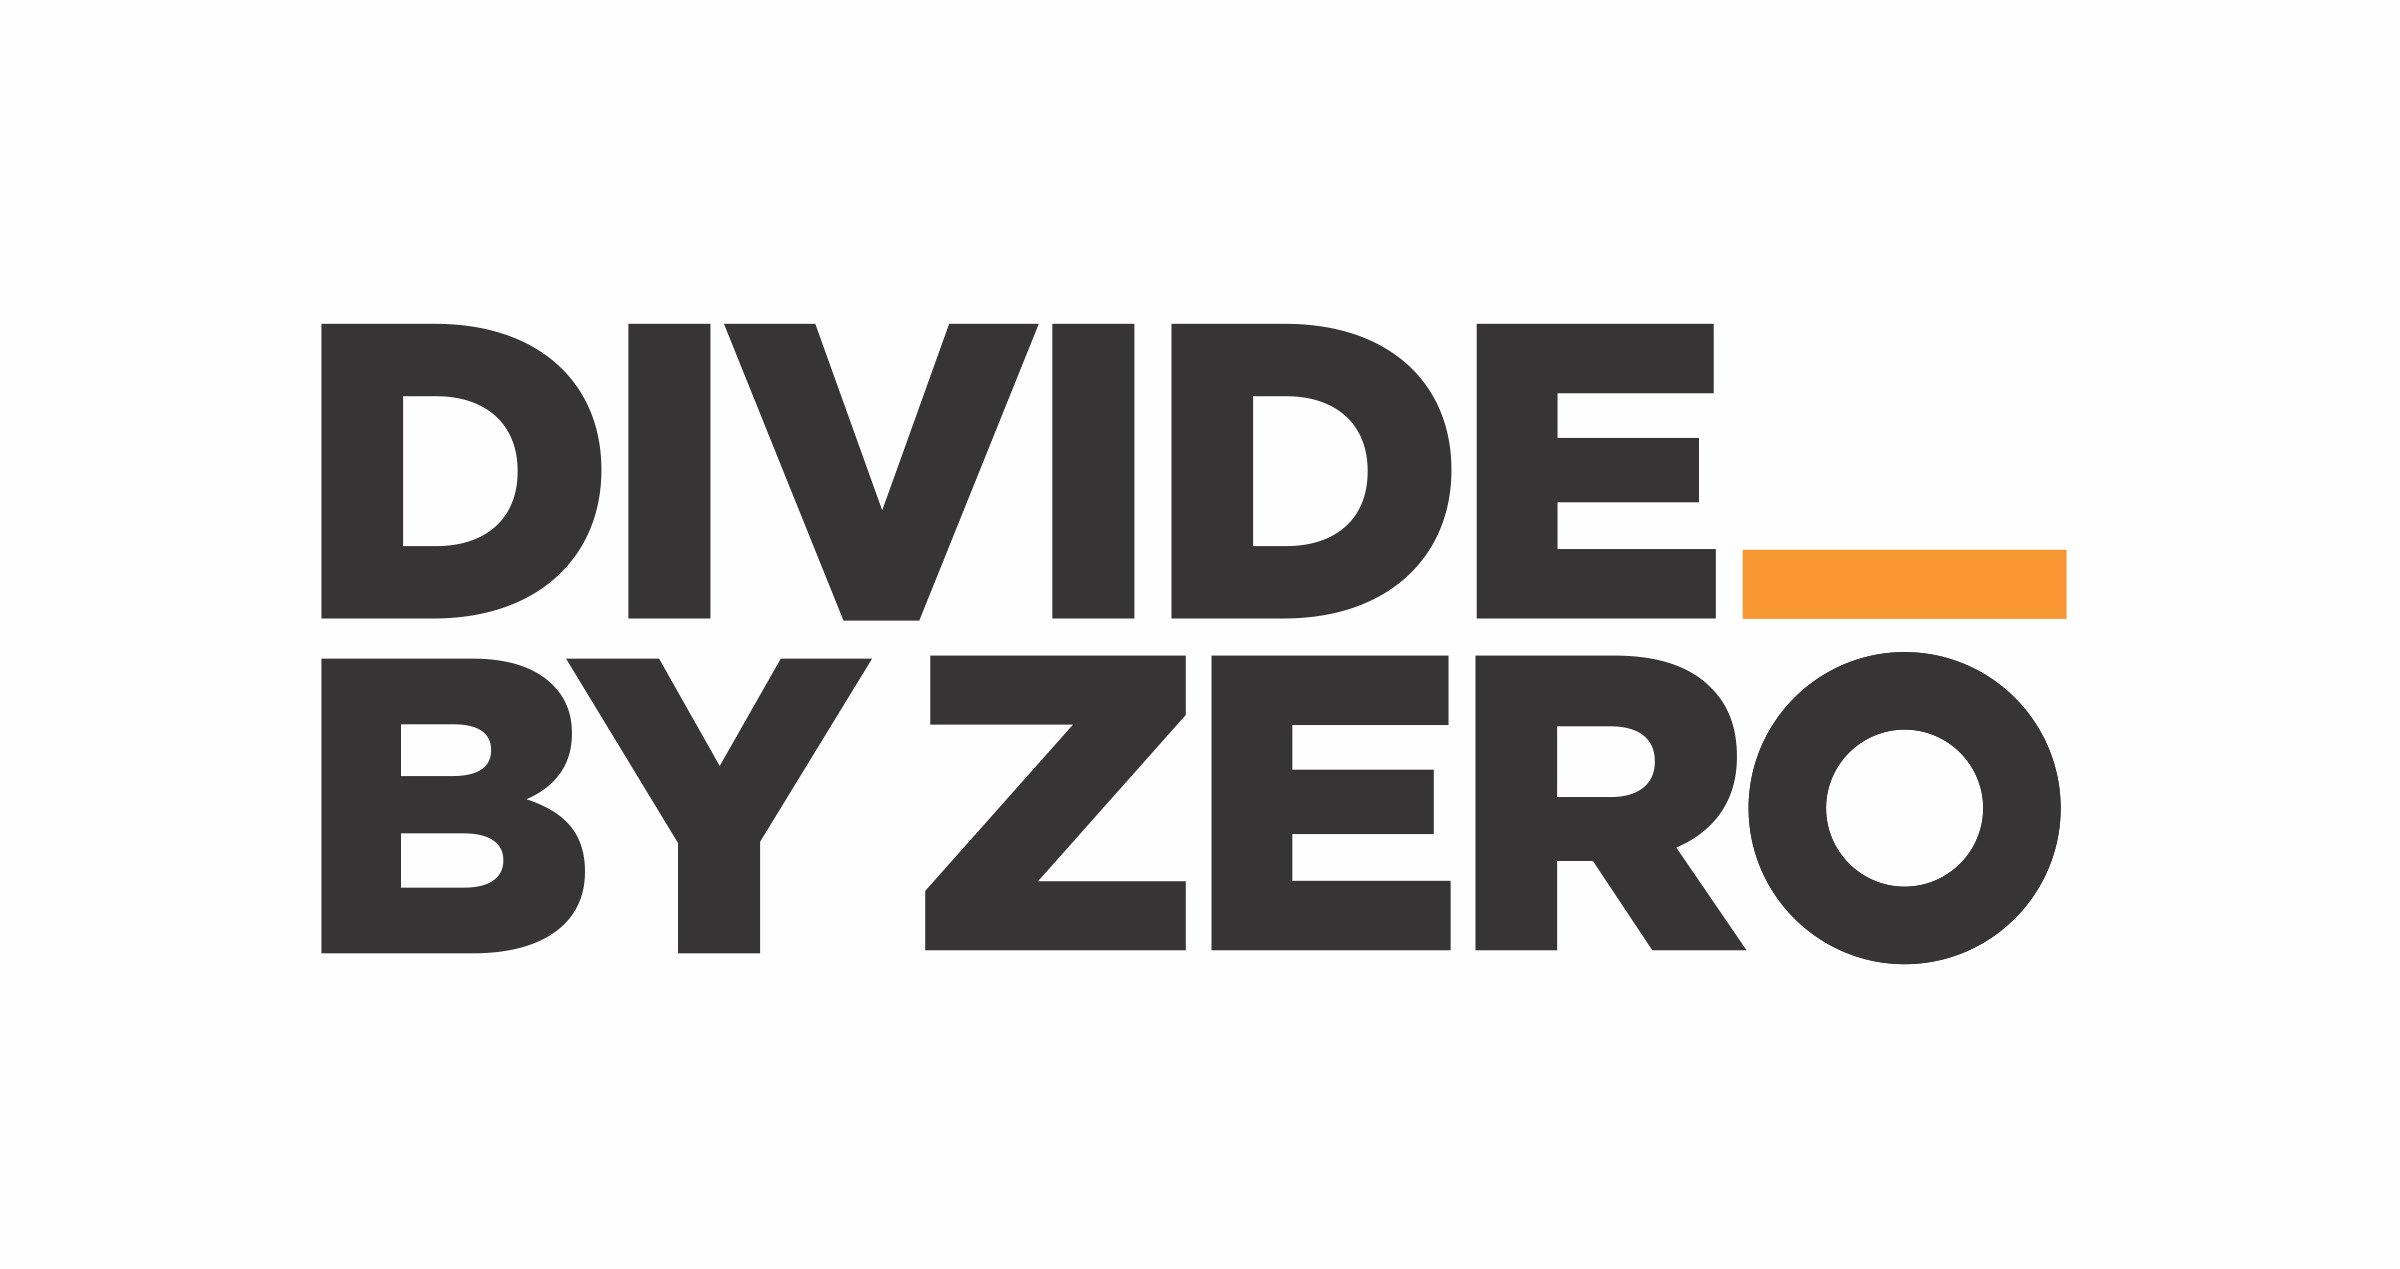 Divide by Zero